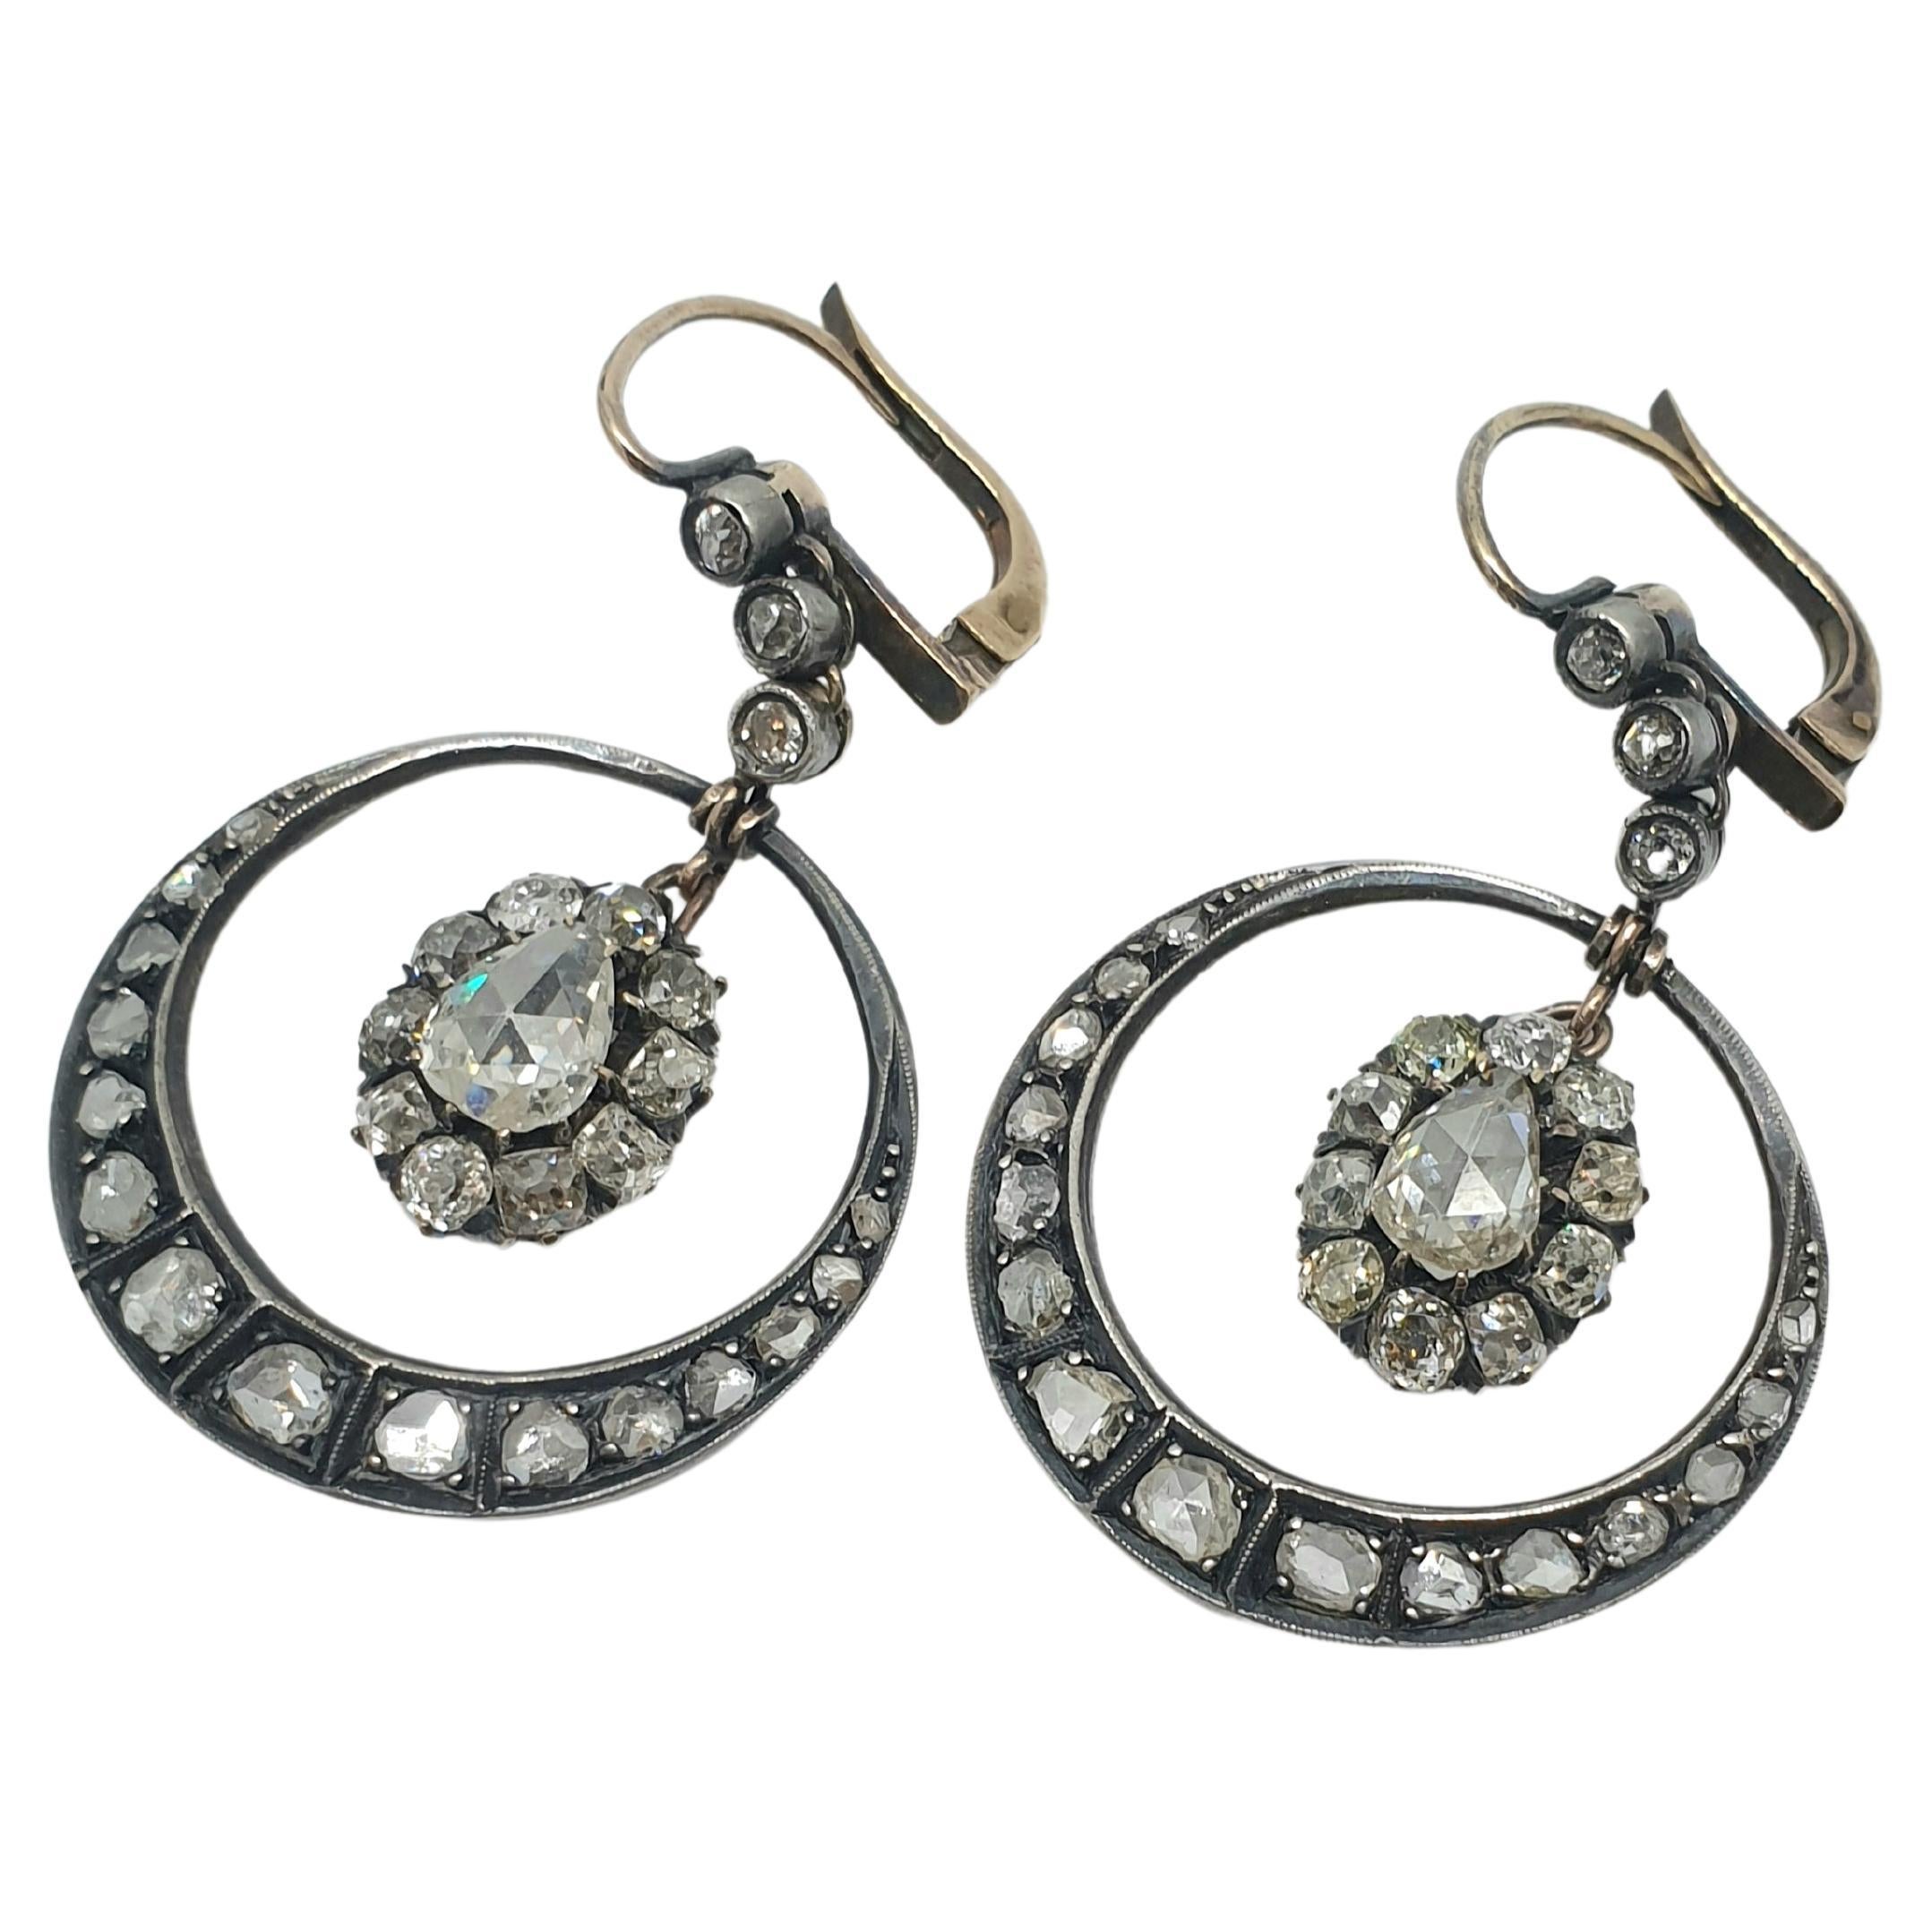 Antique  rose cut diamond large earrings in crescent design with dangling oval shape pendant centered with pear shape rose cut diamond flanked with several old mine cut diamonds white color excellent spark with a total estimate diamond weight of 5